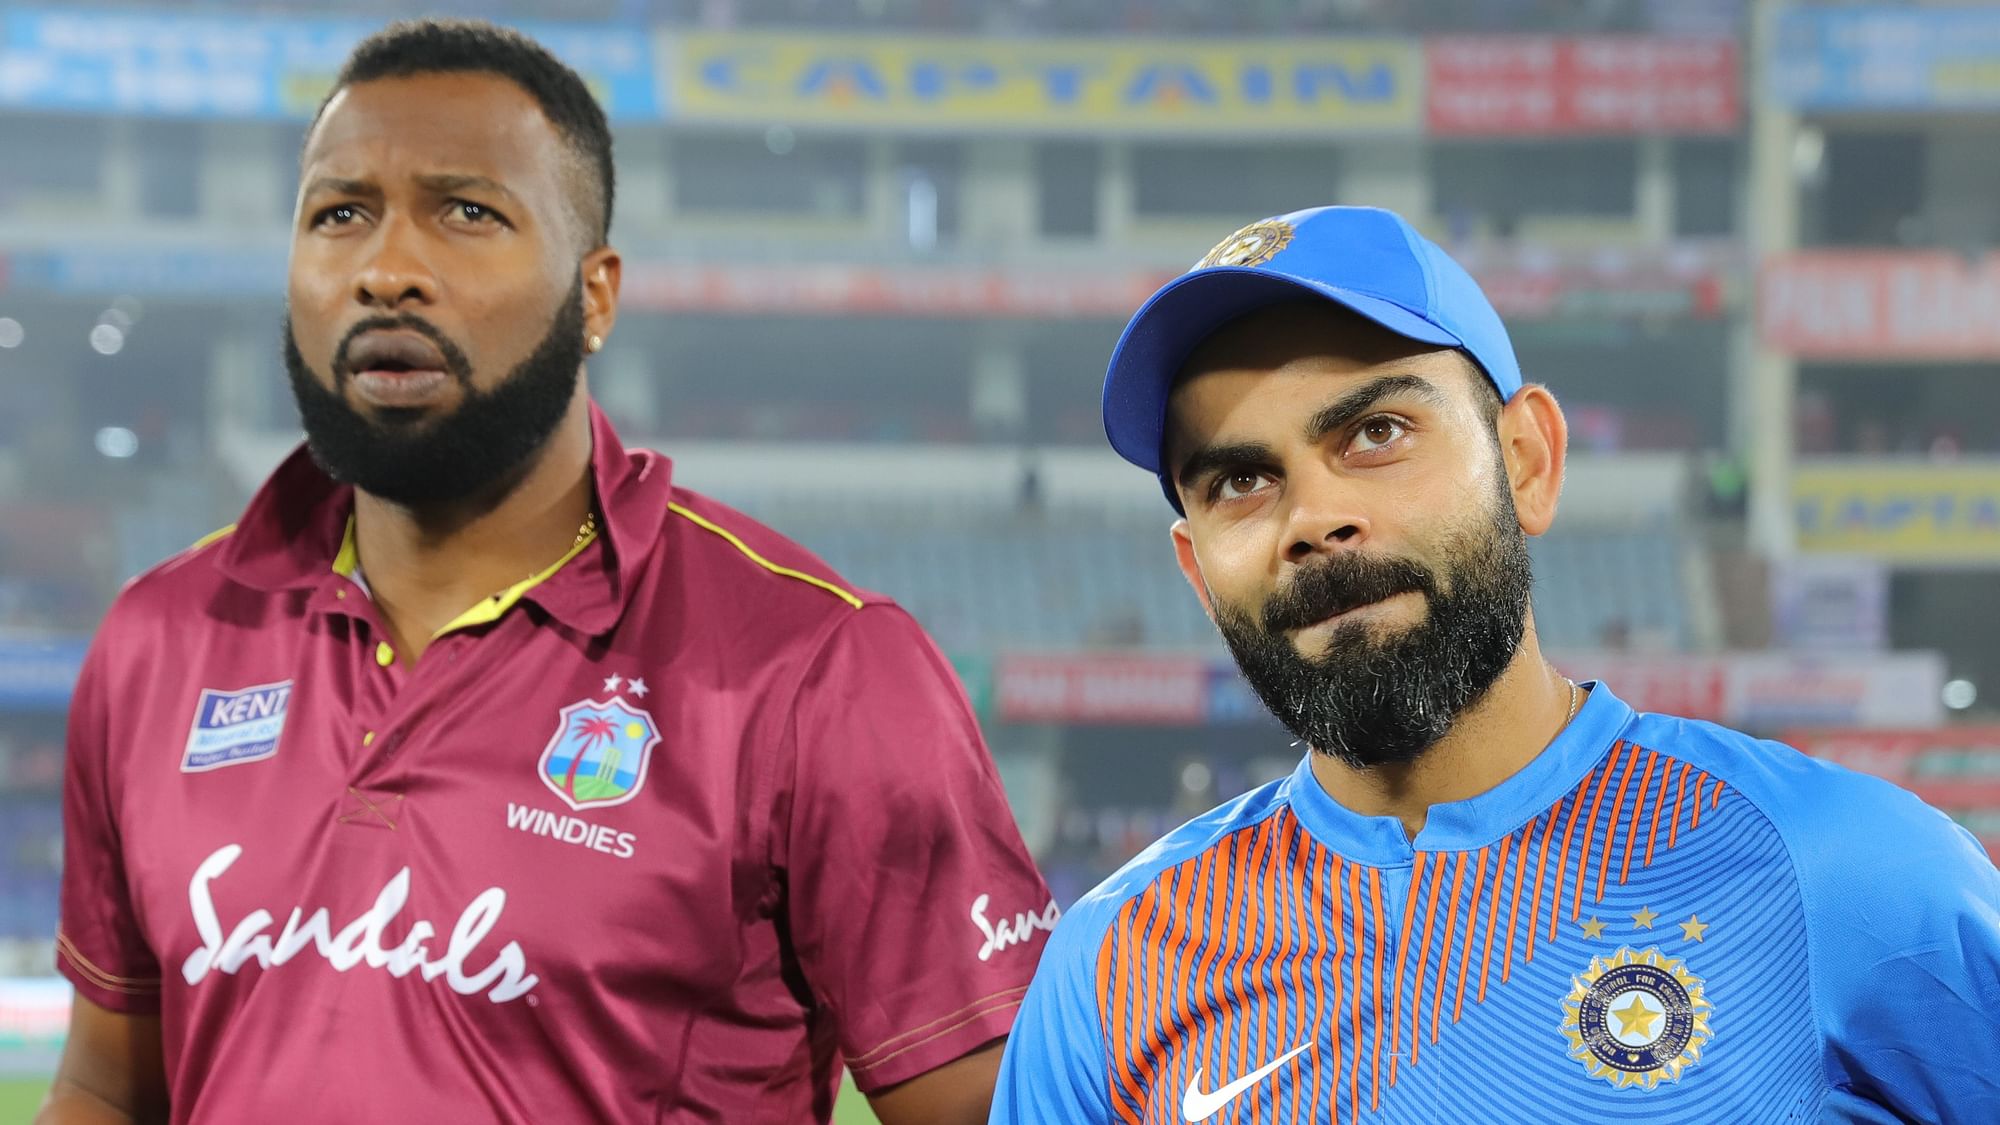 India and West Indies will square off in what promises to be an enthralling series-finale in Mumbai on Wednesday, 11 December.